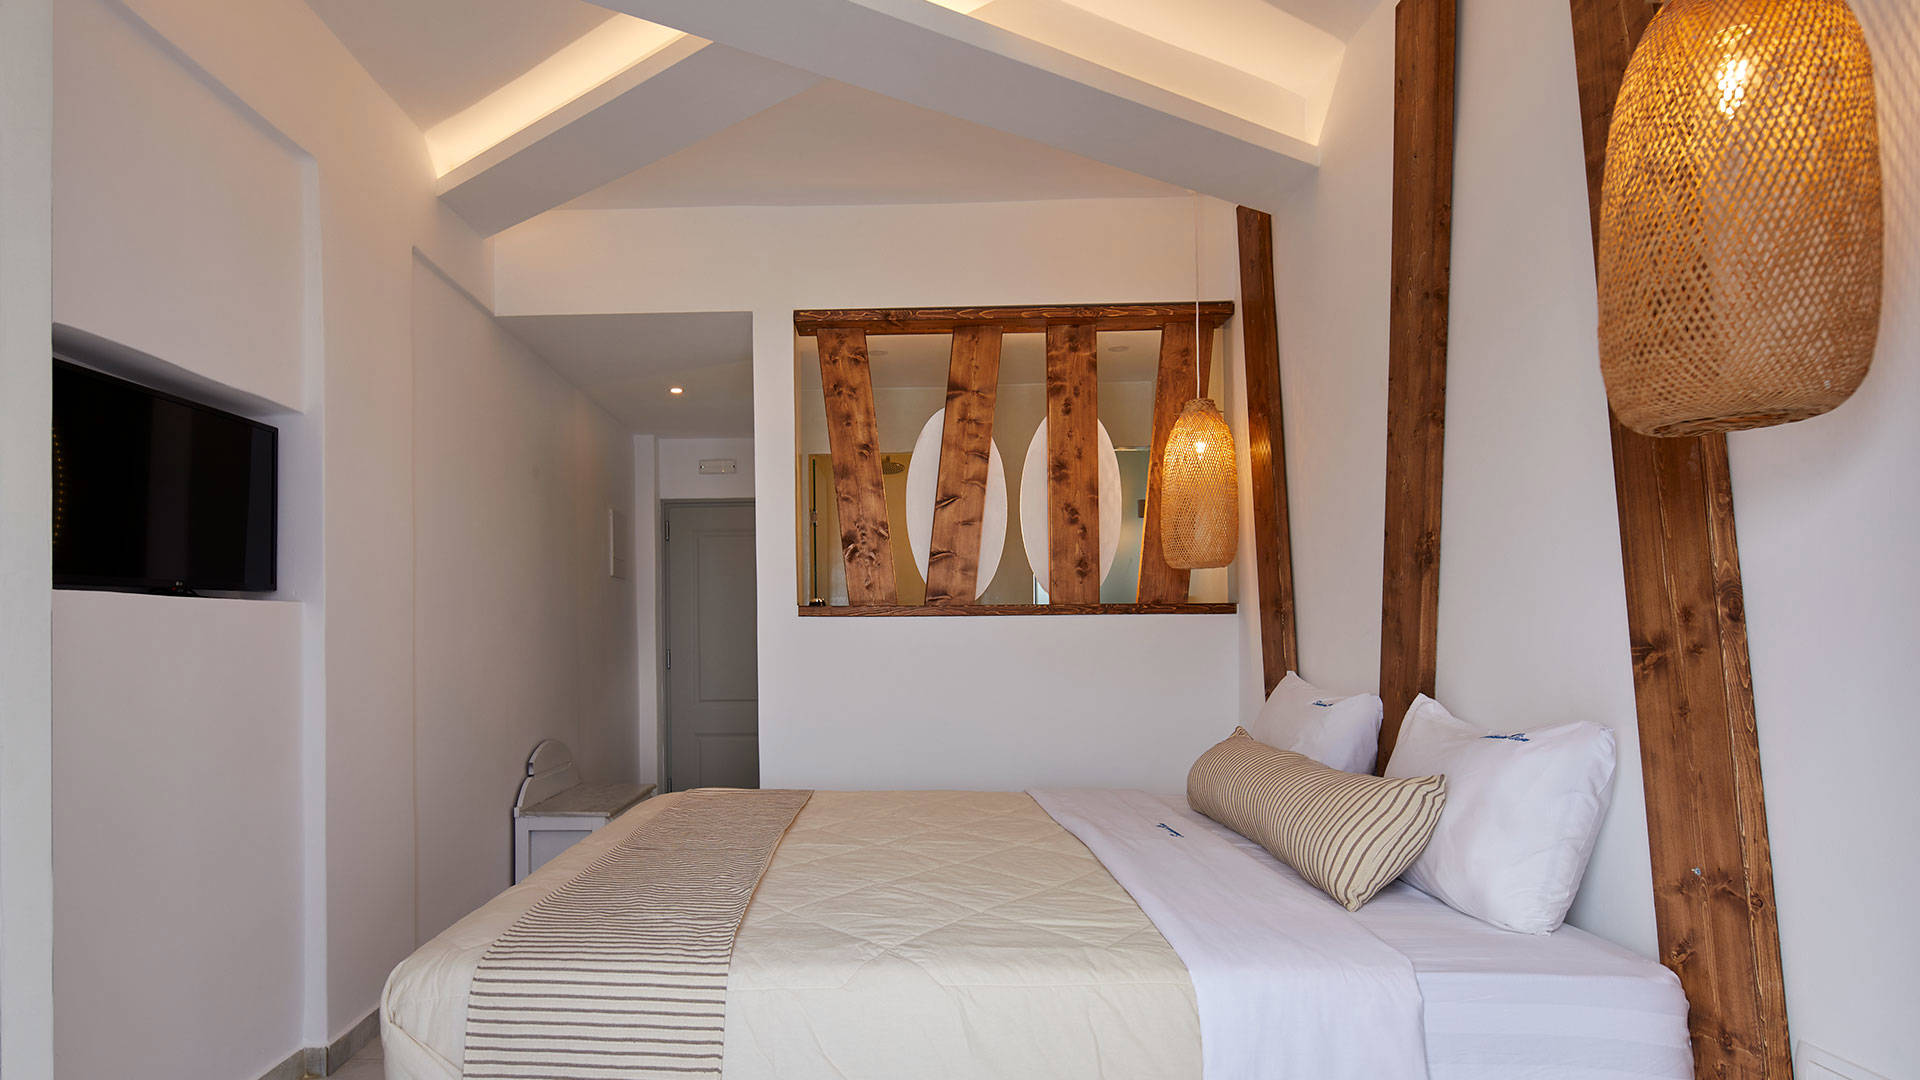 
Santorini View Hotel bedroom with king size bed, tv, wooden decoration and bamboo lights